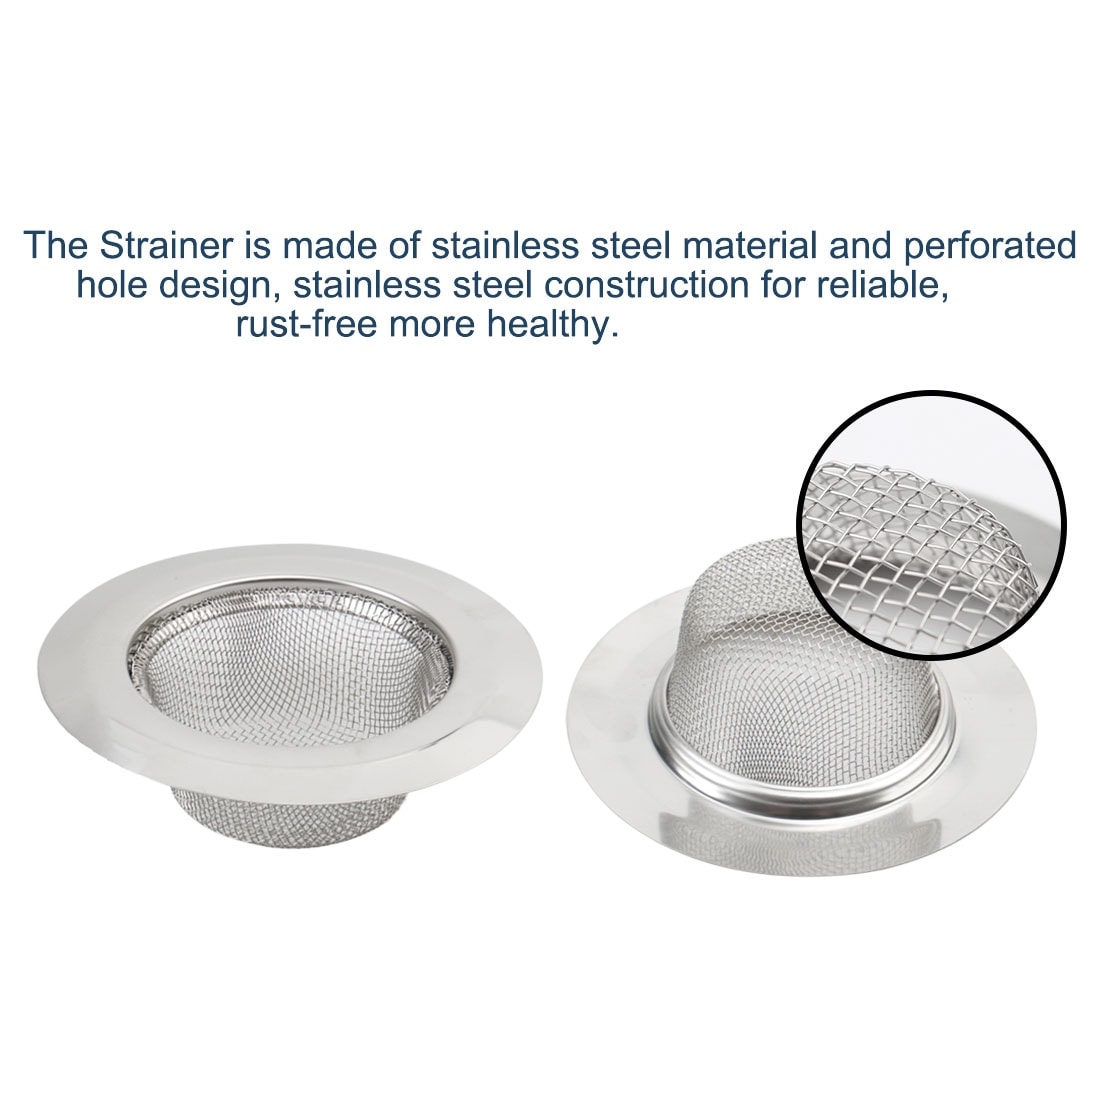 https://ak1.ostkcdn.com/images/products/is/images/direct/2fd9343b5be4e57b7c5f08863b8994a21a68b173/2pcs-Kitchen-Sink-Drain-Strainer-Stainless-Steel-Anti-clogging-Mesh-Drain-Stopper-with-Rim-4.5-Inch-Bathroom-Silver-Tone.jpg